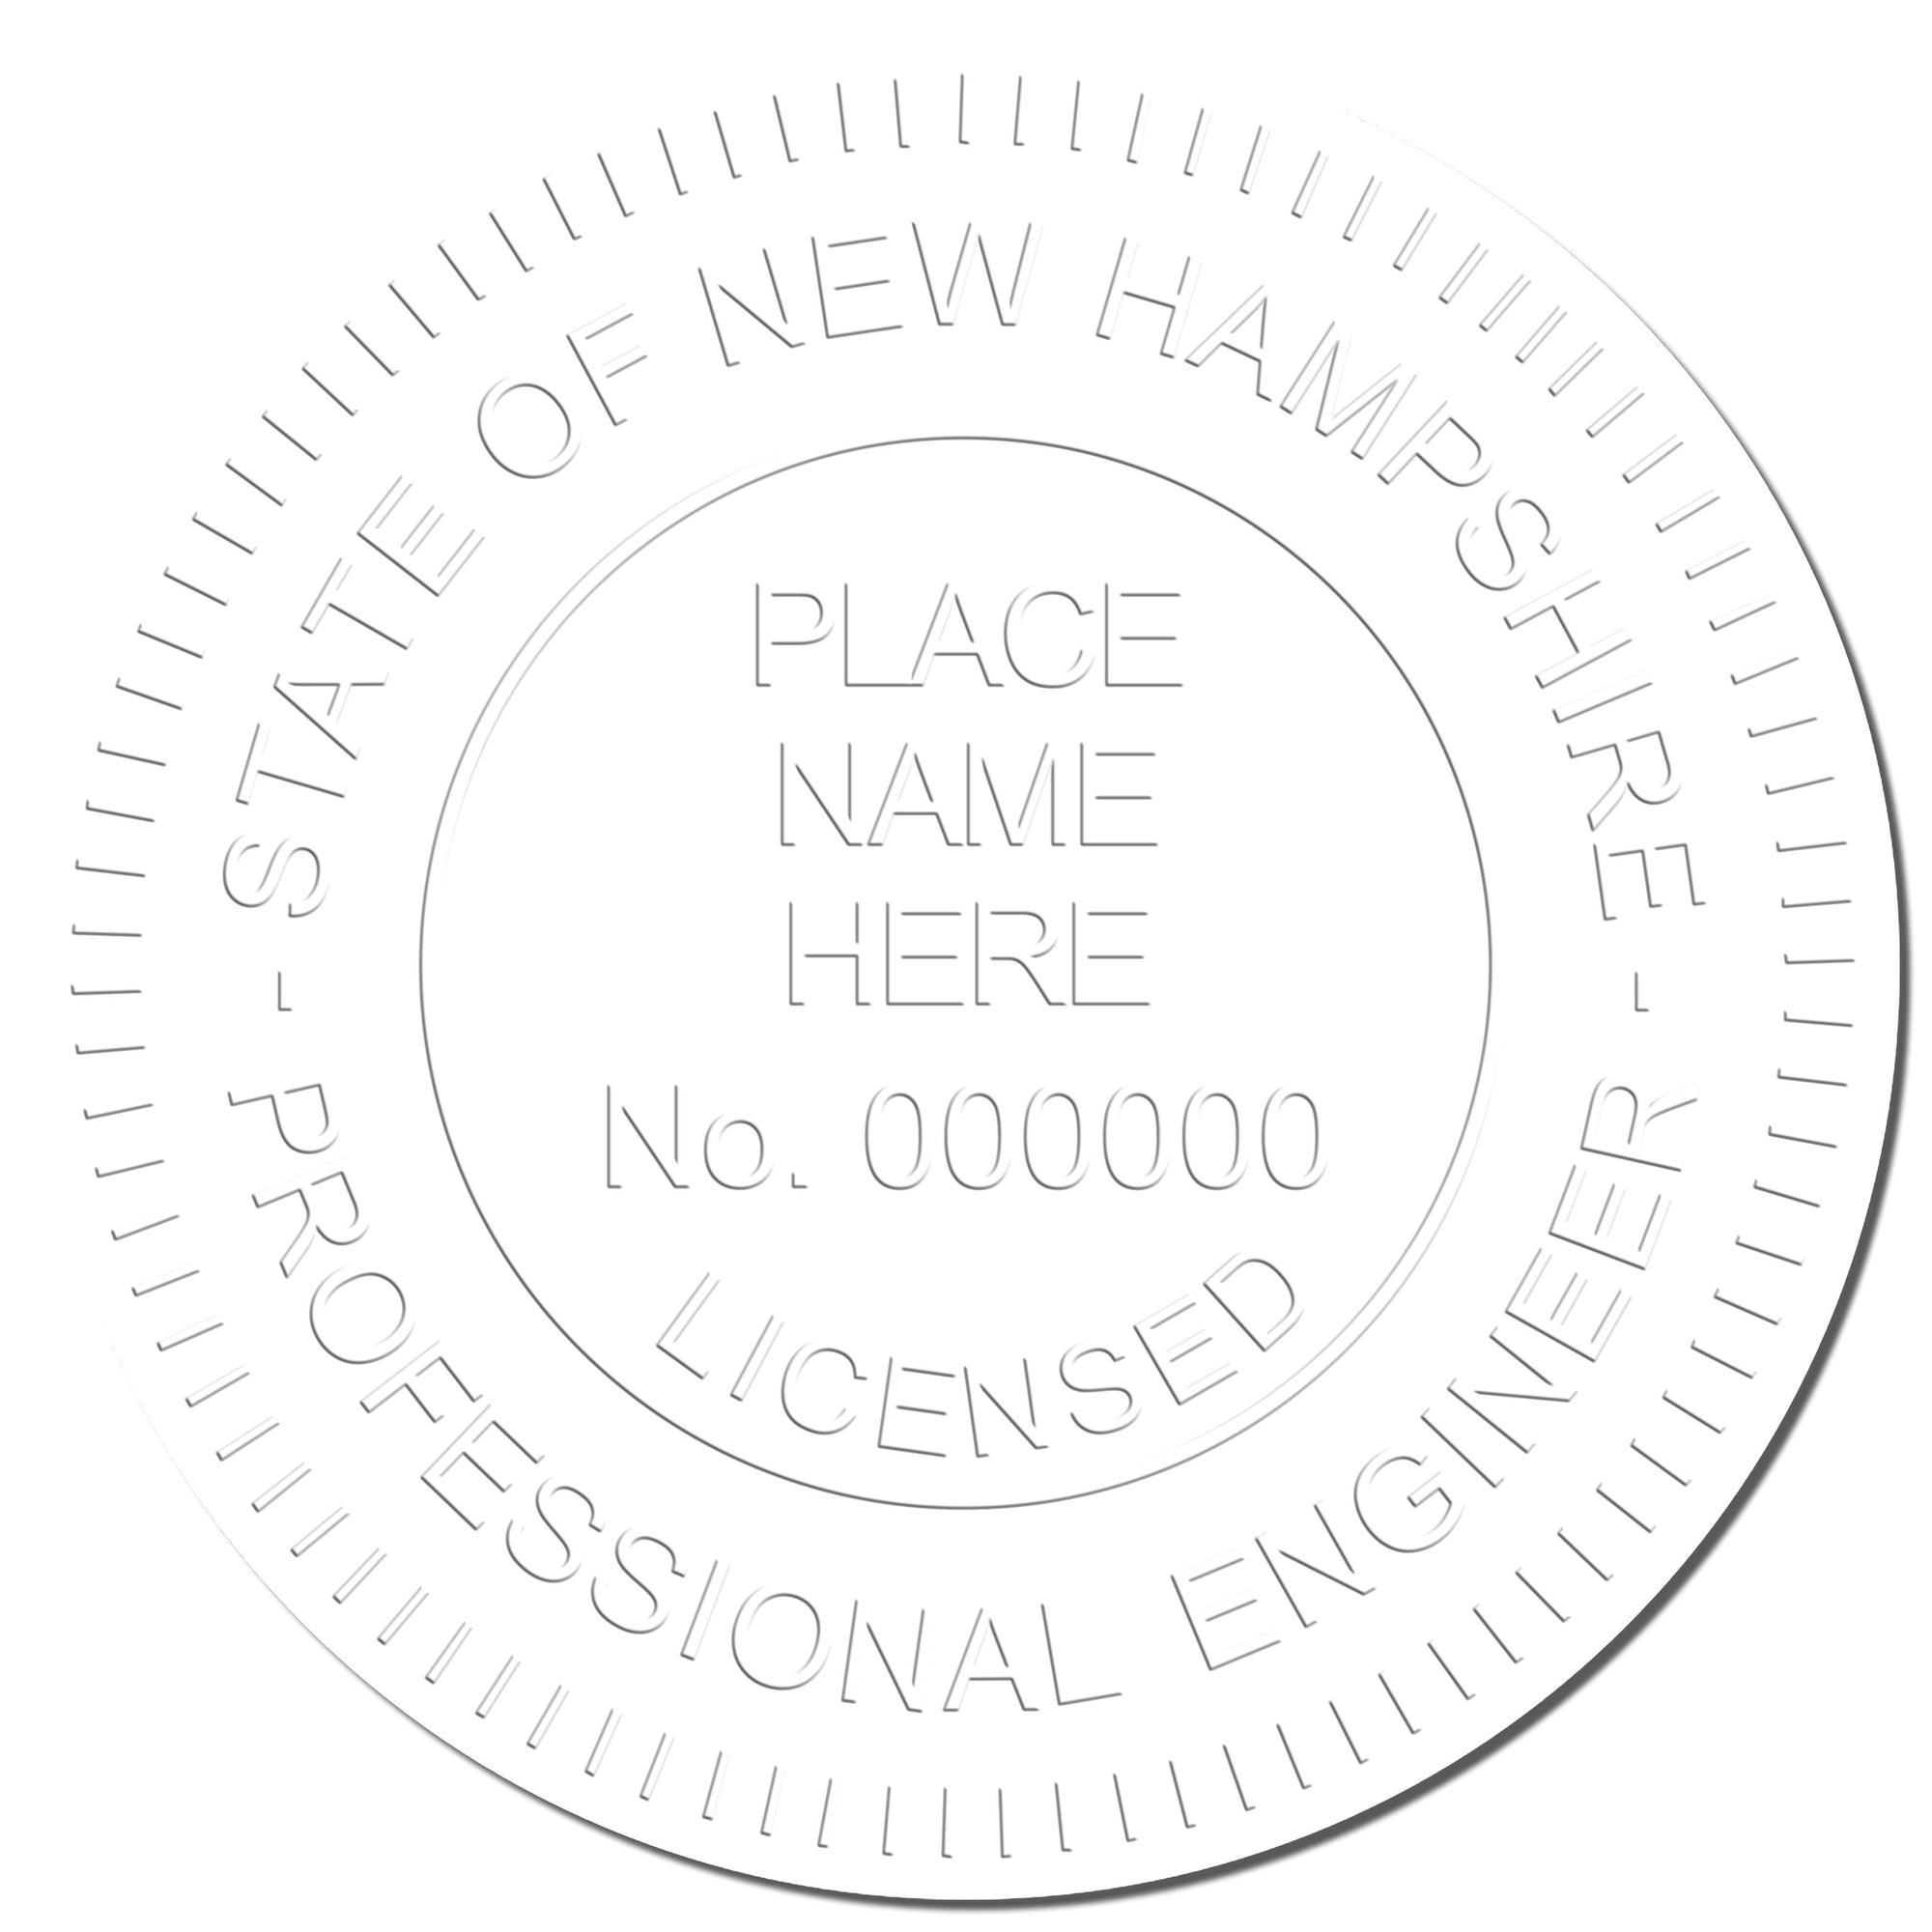 The main image for the New Hampshire Engineer Desk Seal depicting a sample of the imprint and electronic files